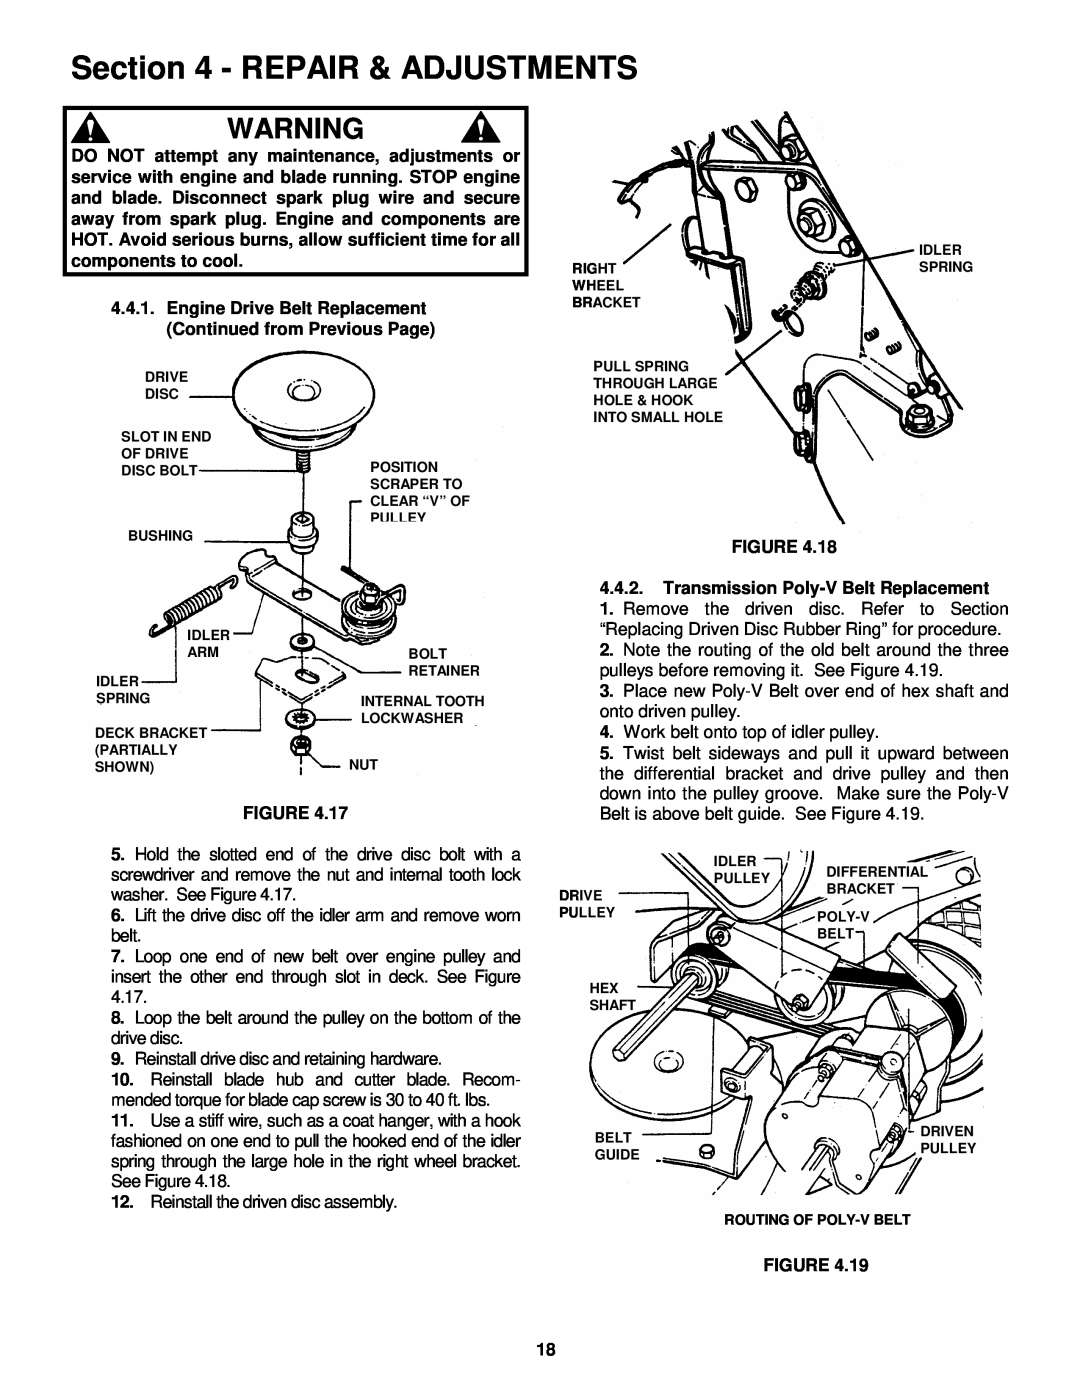 Snapper P216012E important safety instructions Repair & Adjustments 